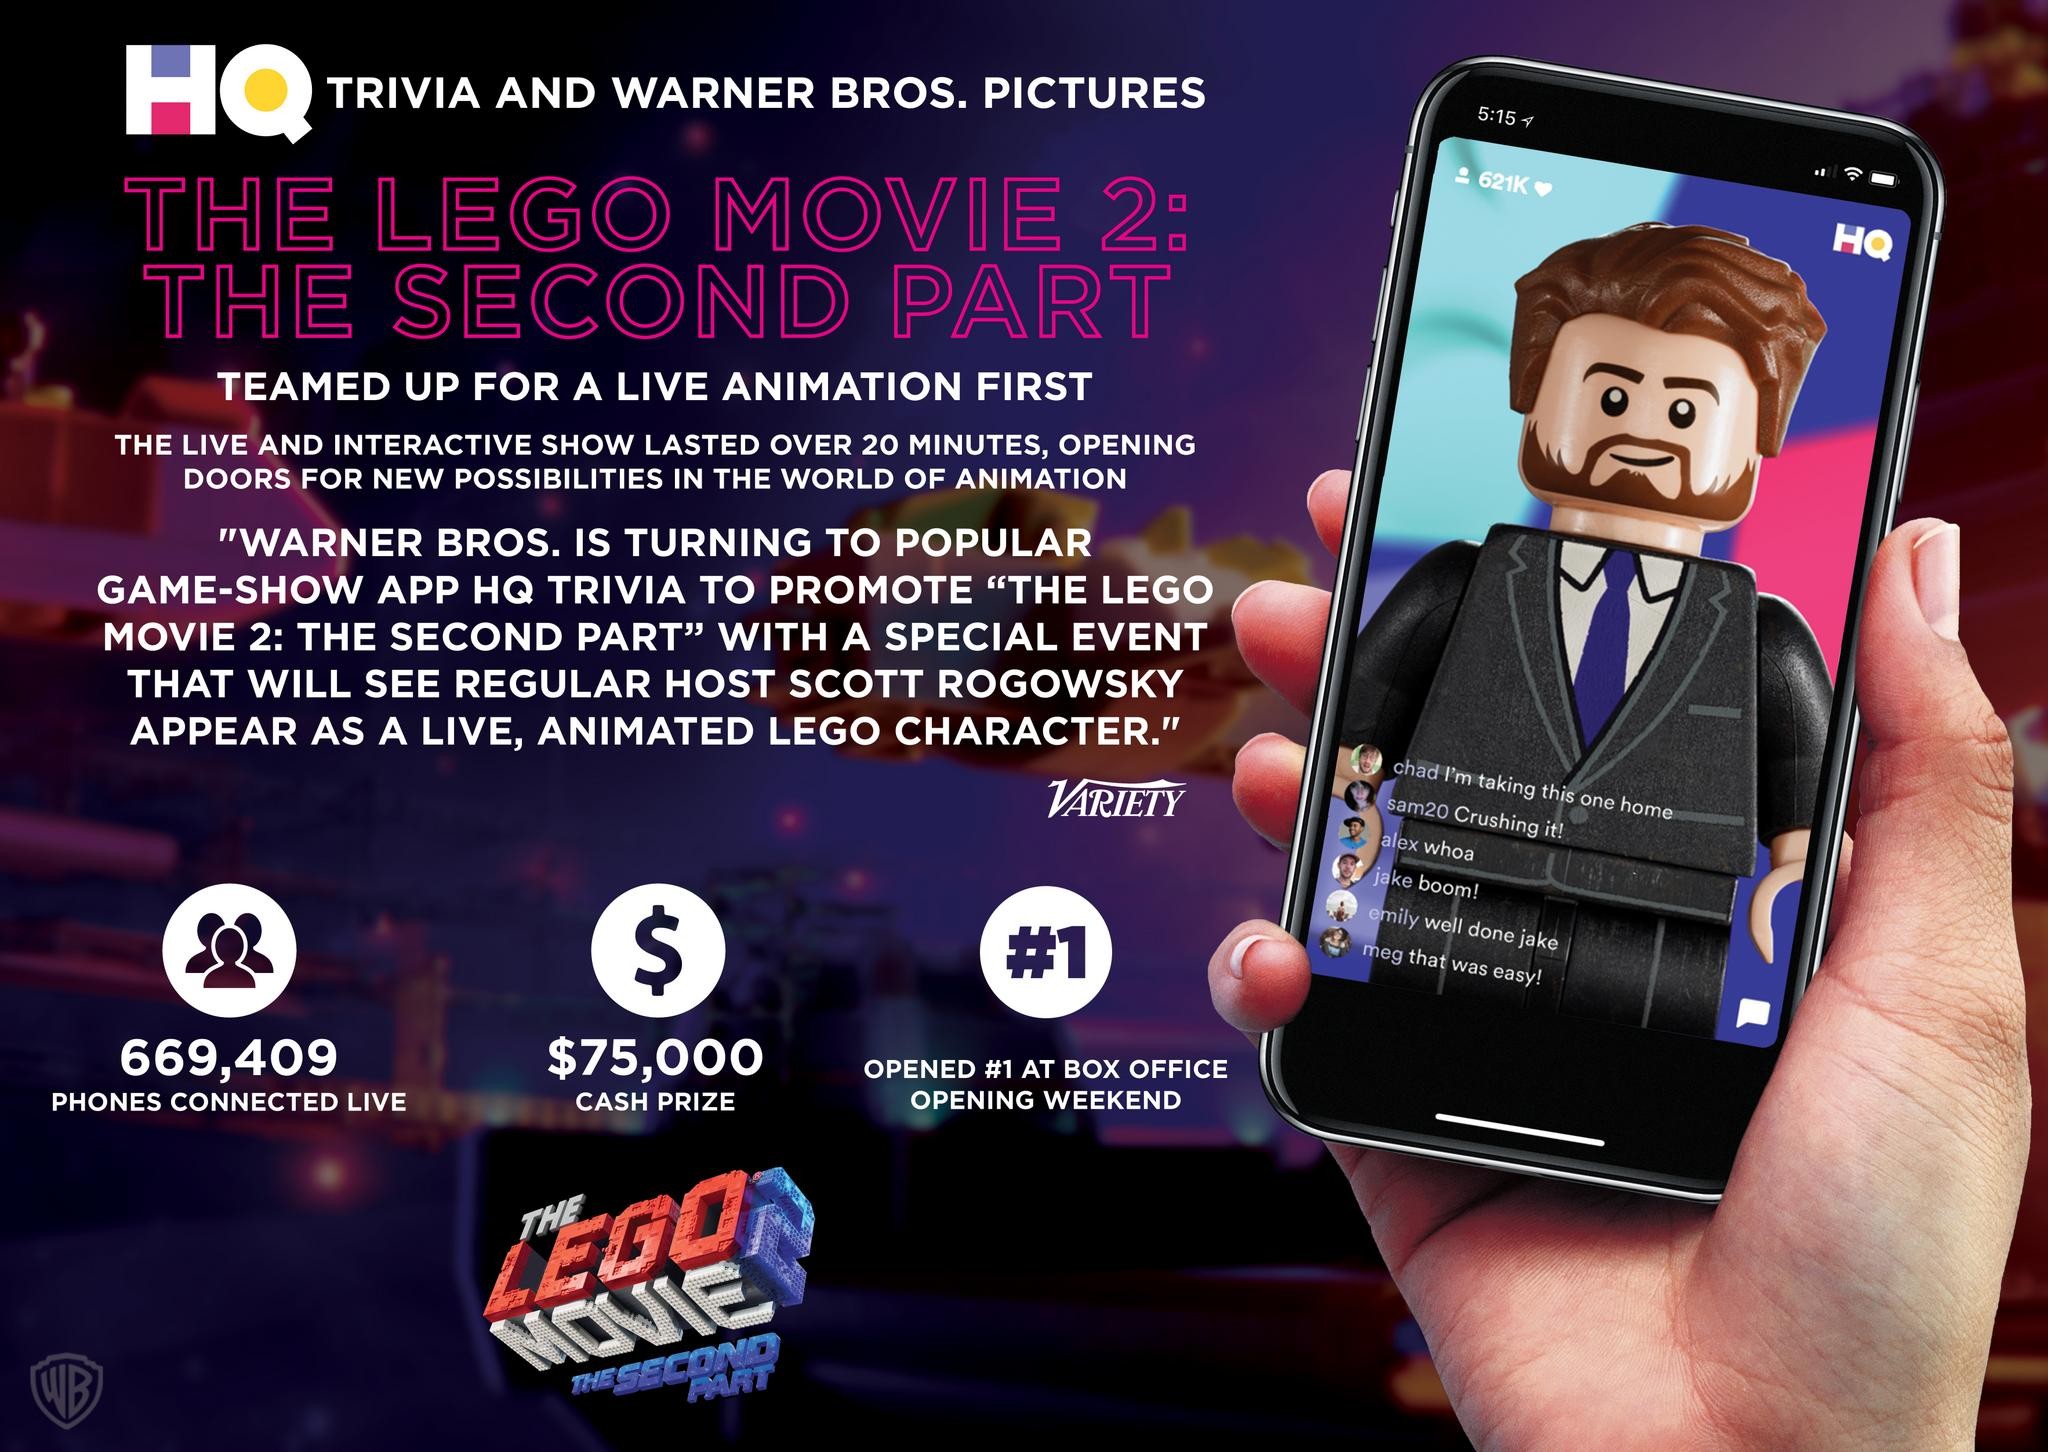 HQ Trivia x Warner Bros. Pictures: A Live Animation First